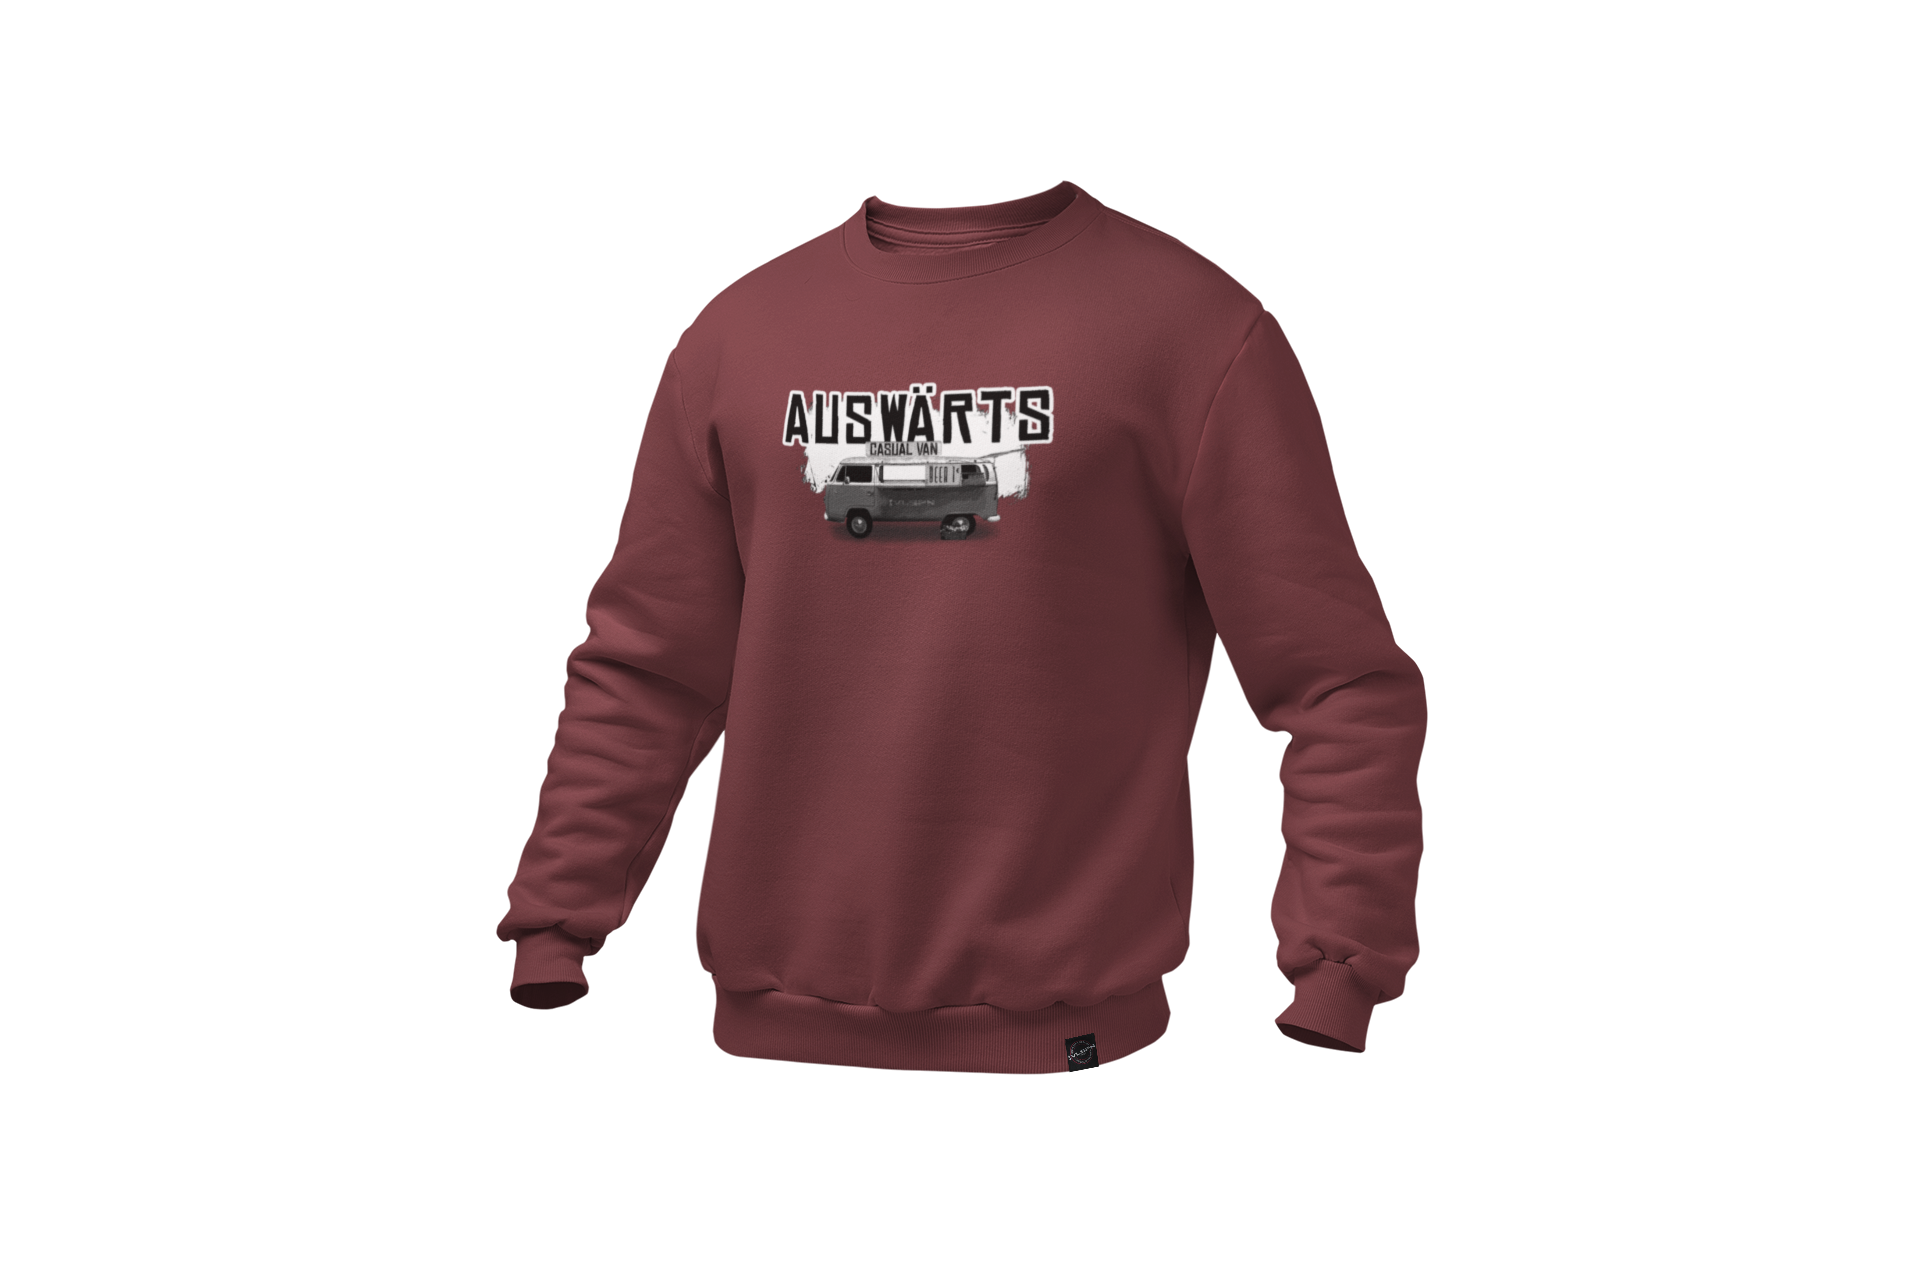 mockup-of-a-ghosted-crewneck-sweatshirt-over-a-solid-background-26960 (44).png